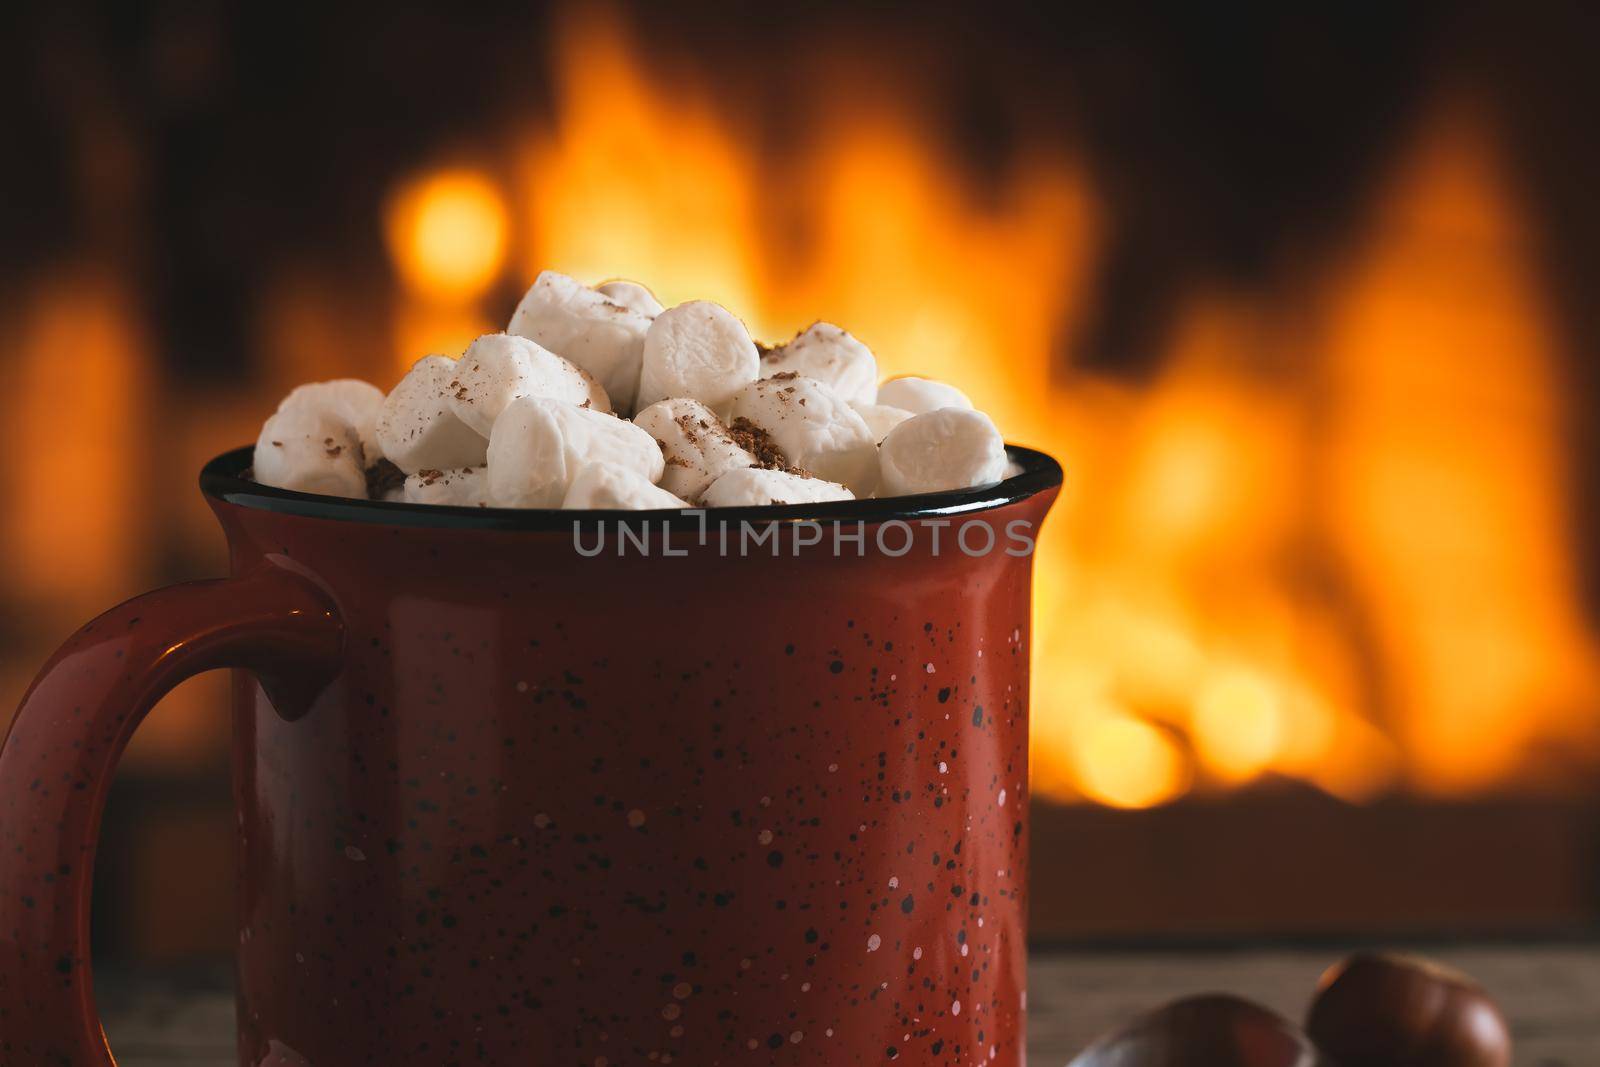 Cocoa with marshmallows and chocolate in a red mug on a wooden table near a burning fireplace by galsand